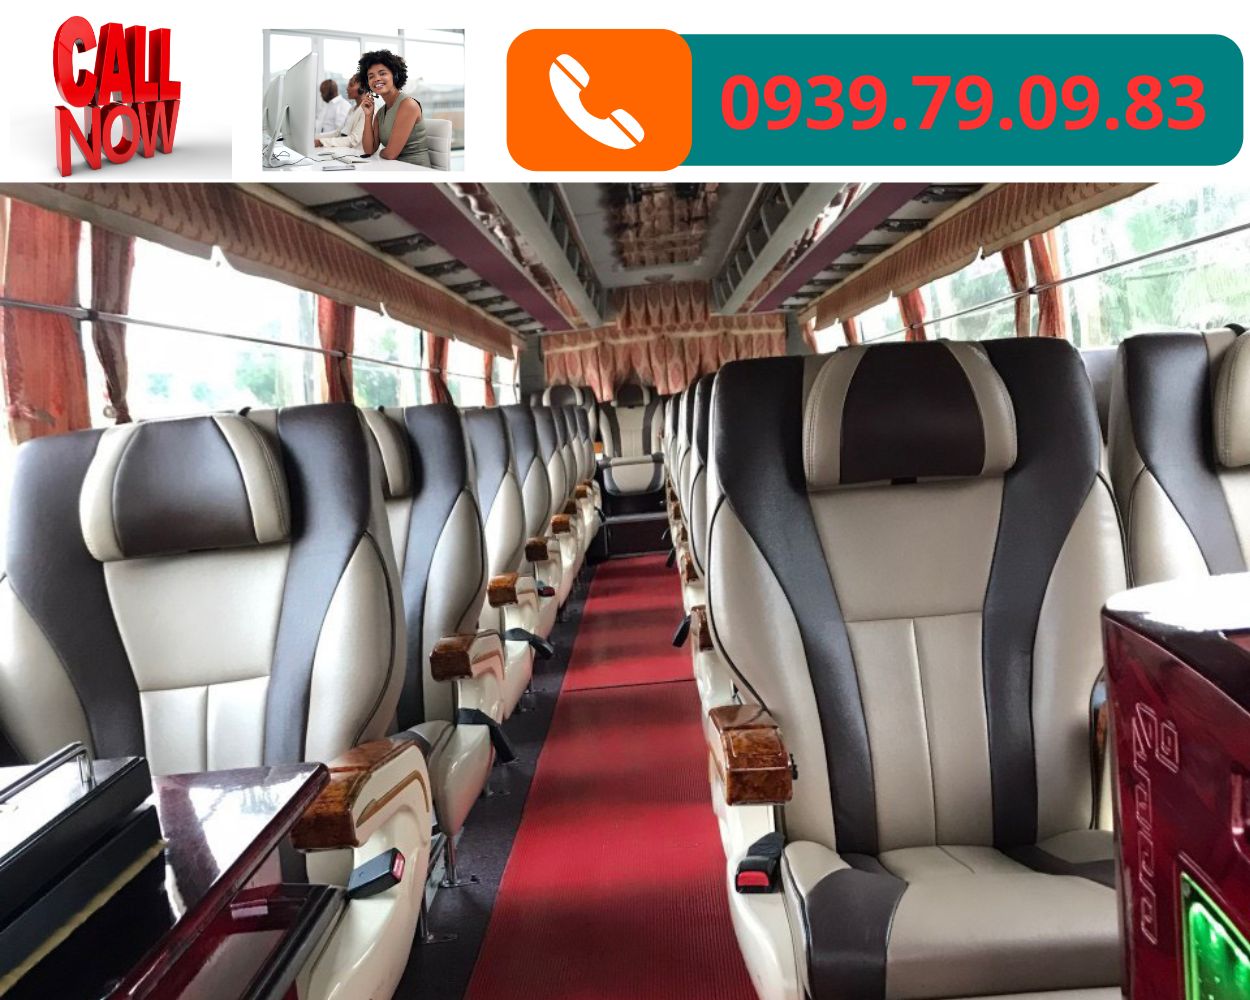 28-seat Contract Limousine Rental for Travel/Wedding